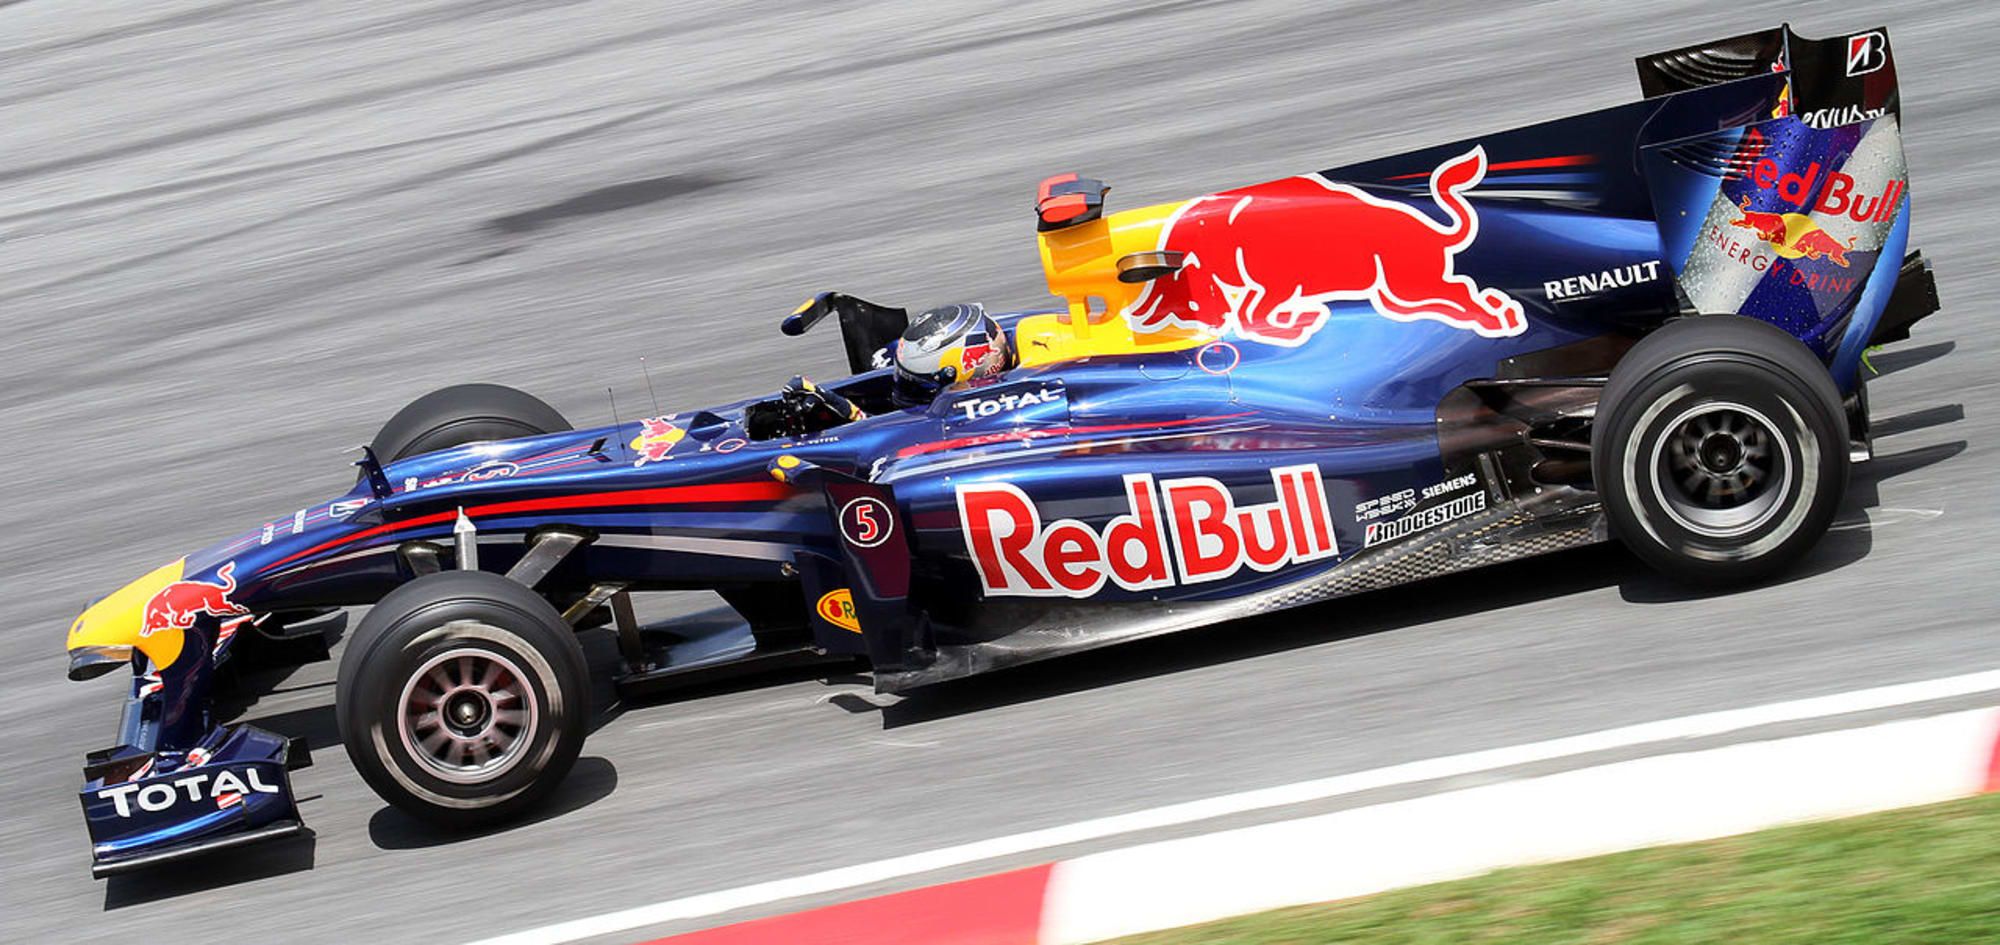 Red Bull won 4 consecutive championships with Vettle using a Renault engine.